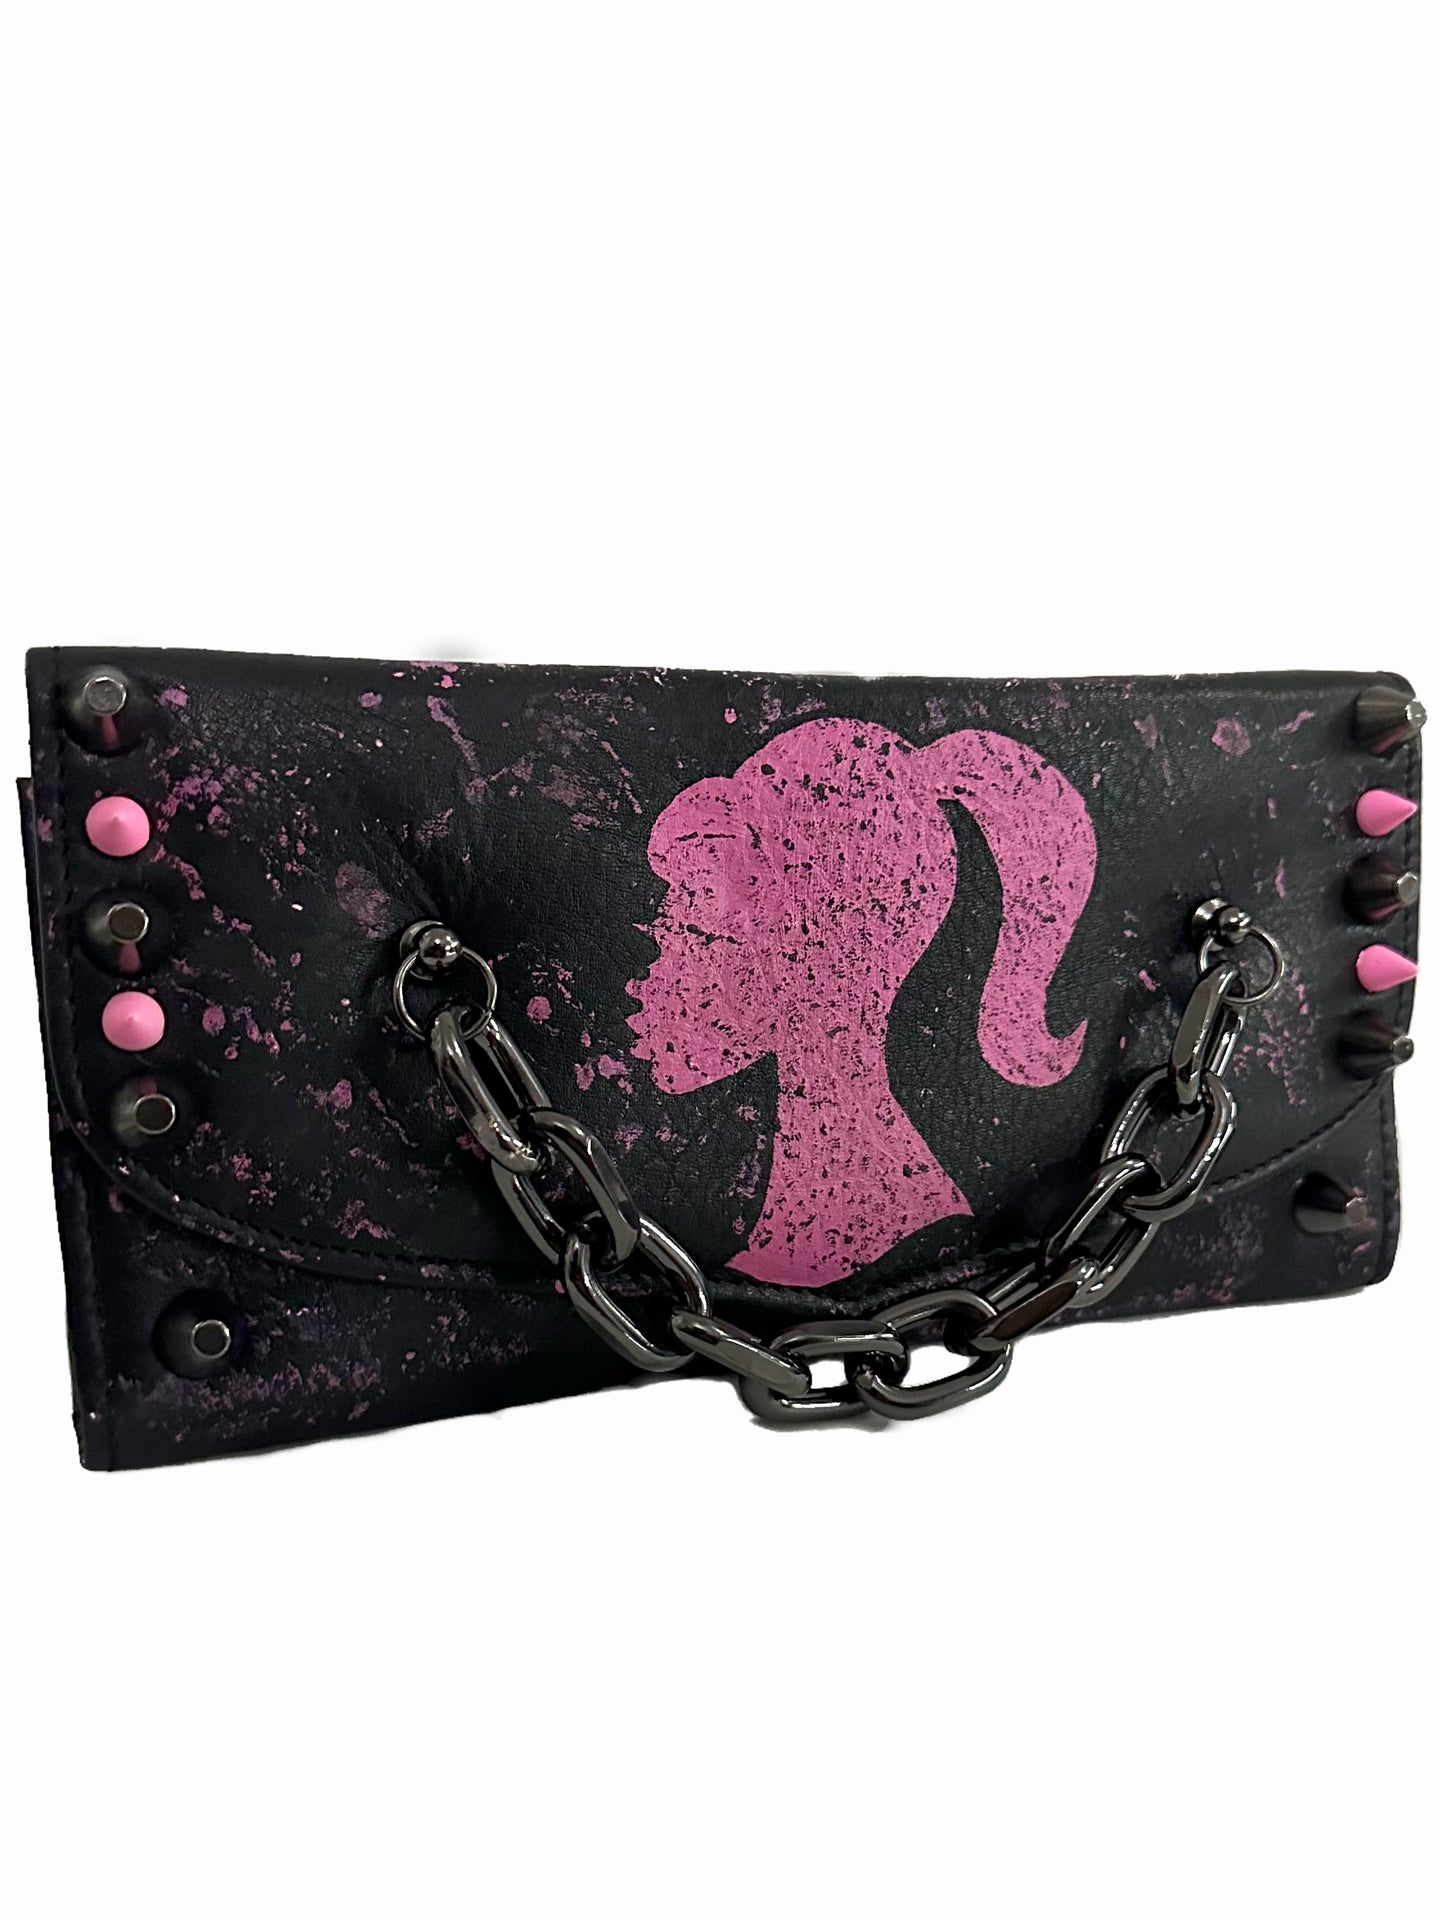 BARBIE GHOUL SPIKED PURSE